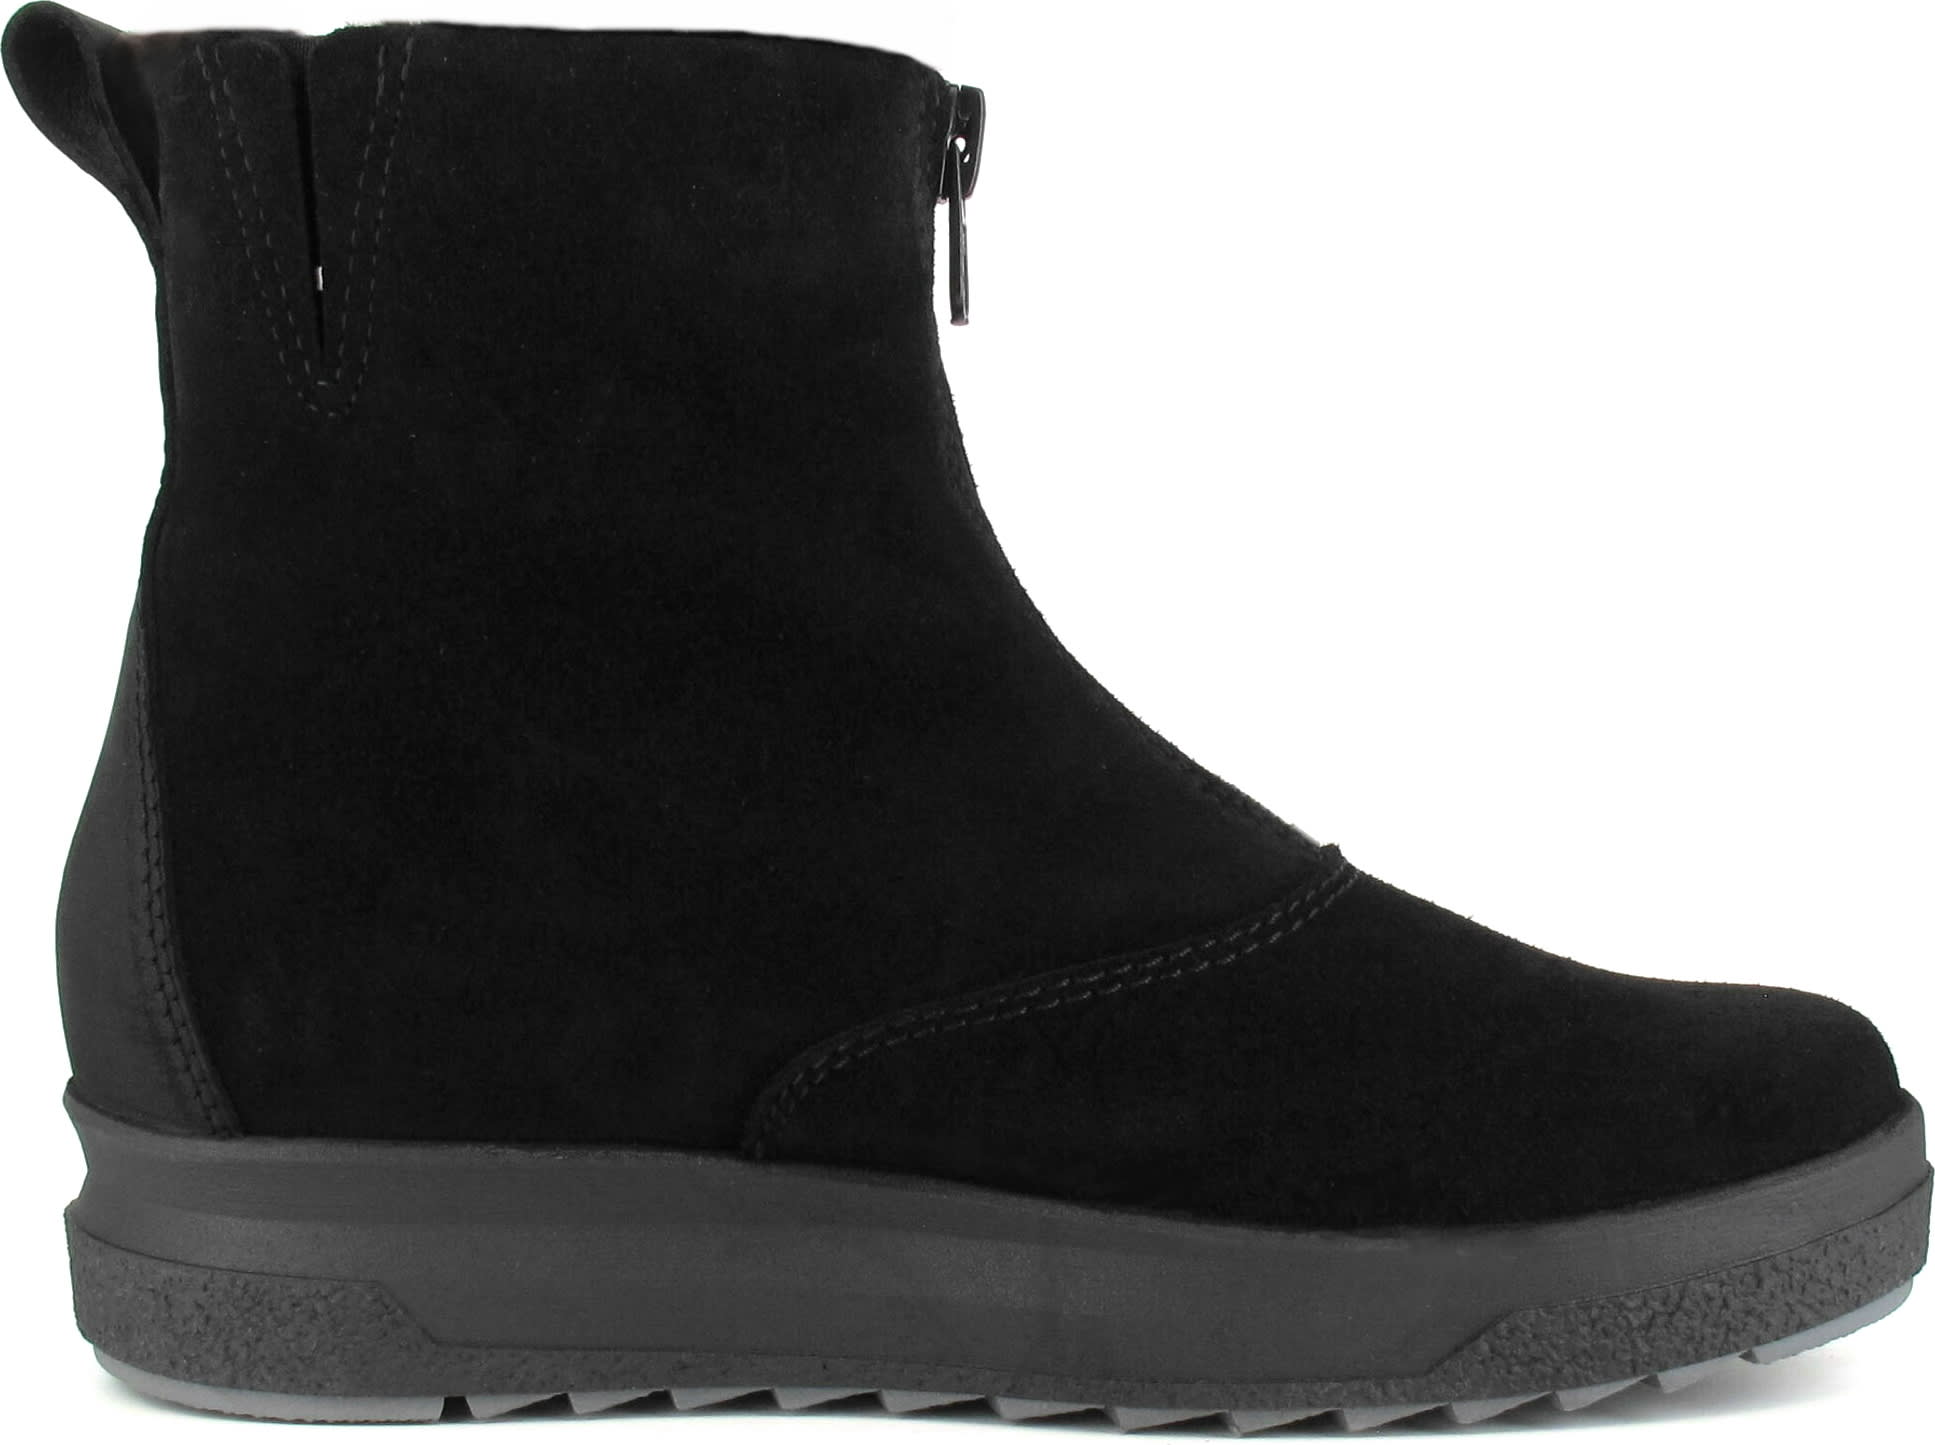 Buy Pomar Women's Uurre Gore-Tex Ankle Boot from Outnorth